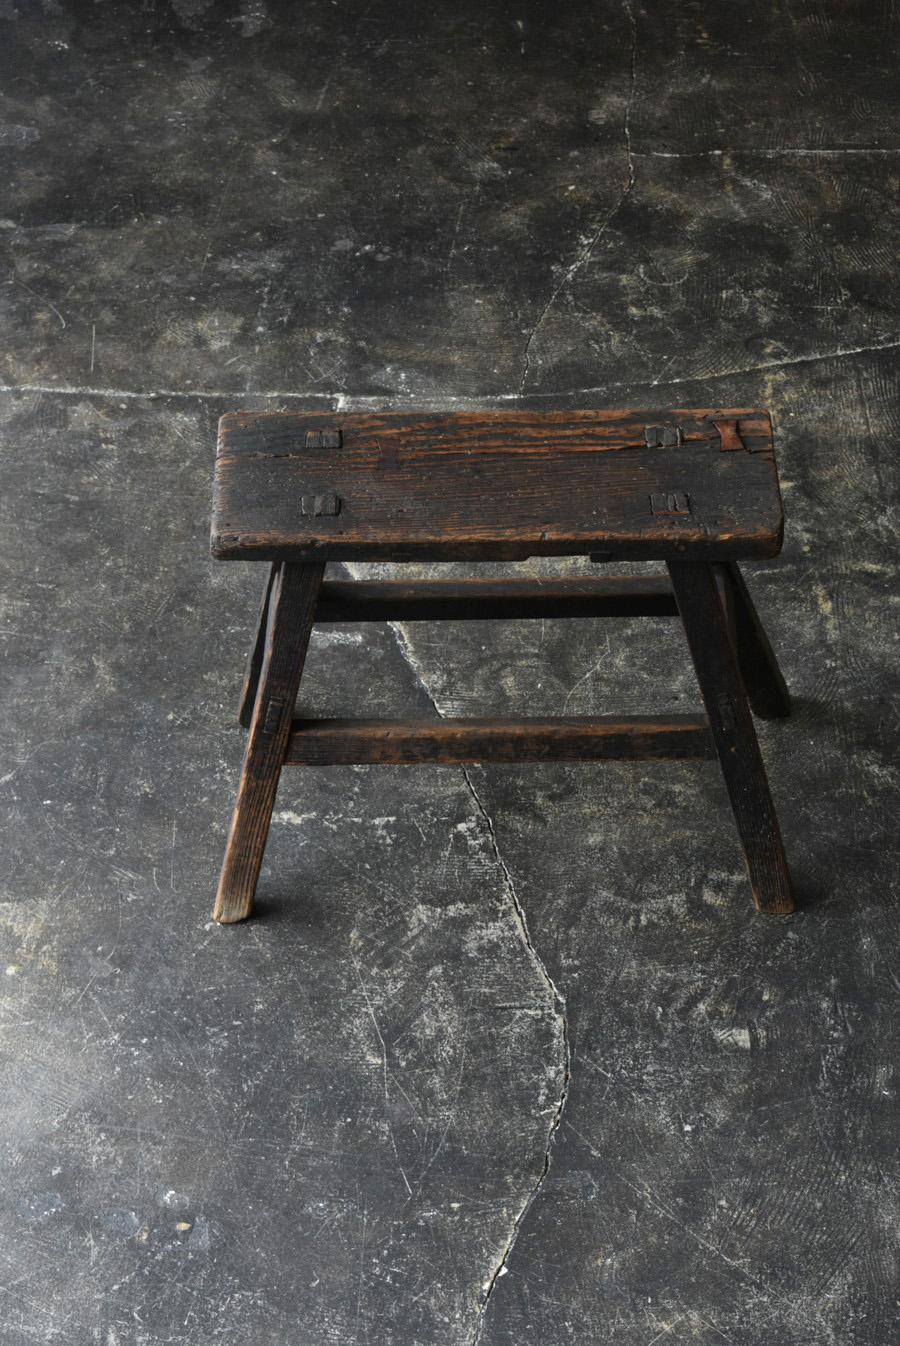 I would like to introduce a very nice stool. This is a wooden stool made in Japan from the Meiji to the early Showa period.

It must have been used with great care and for a very long time, so it is dark overall, the edges and corners of the wood